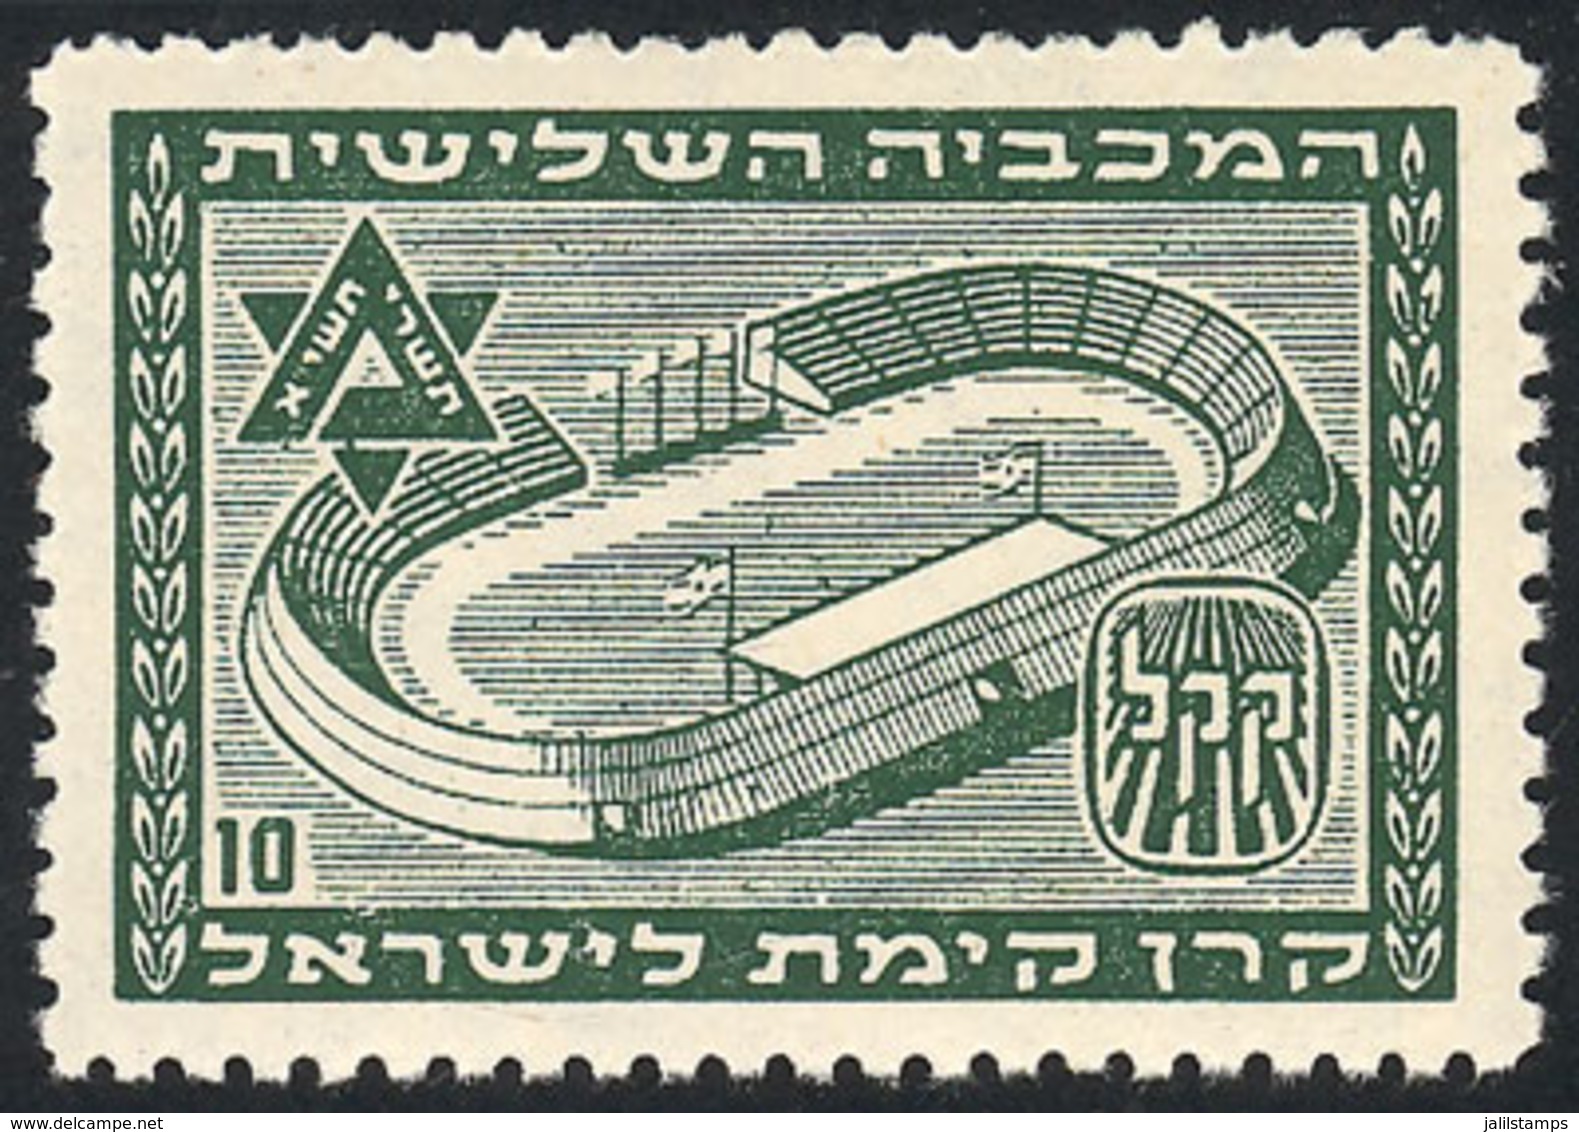 704 ISRAEL: Olympic Or Football Stadium, MNH, Excellent Quality! - Cinderellas